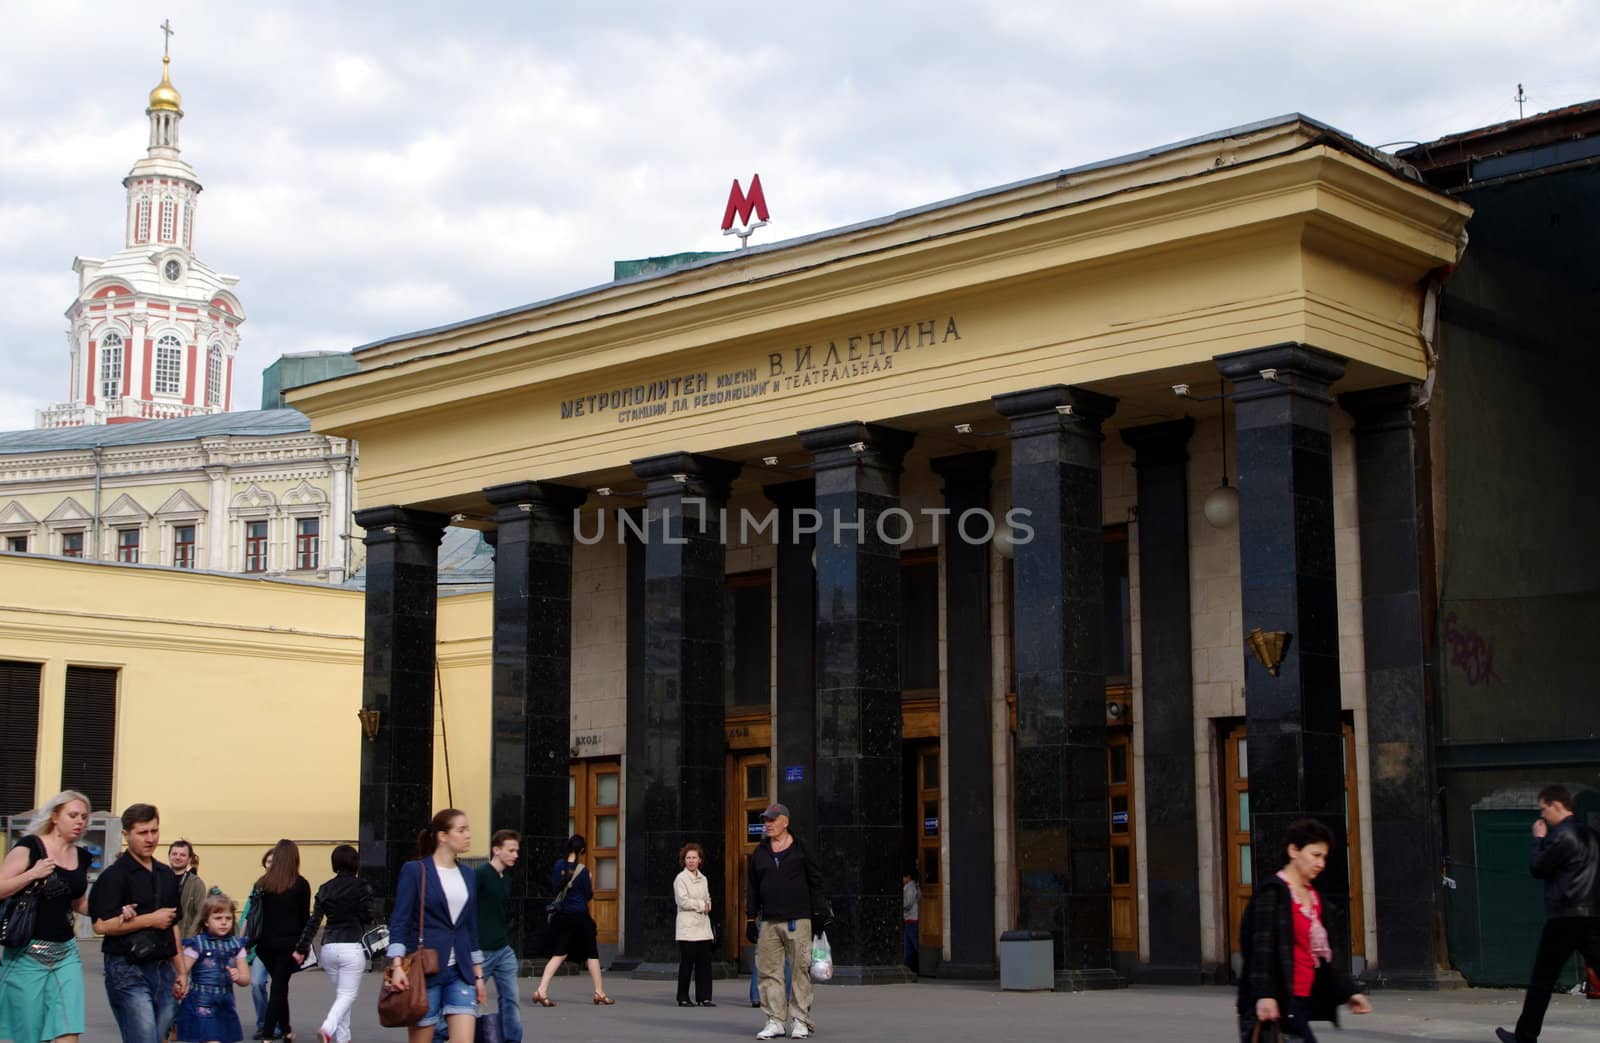 Moscow, Russia - June 14, 2010: Summer day. Peoples walk near the entrance of Teatral'naya metro station on June 14, 2010 in Moscow, Russia